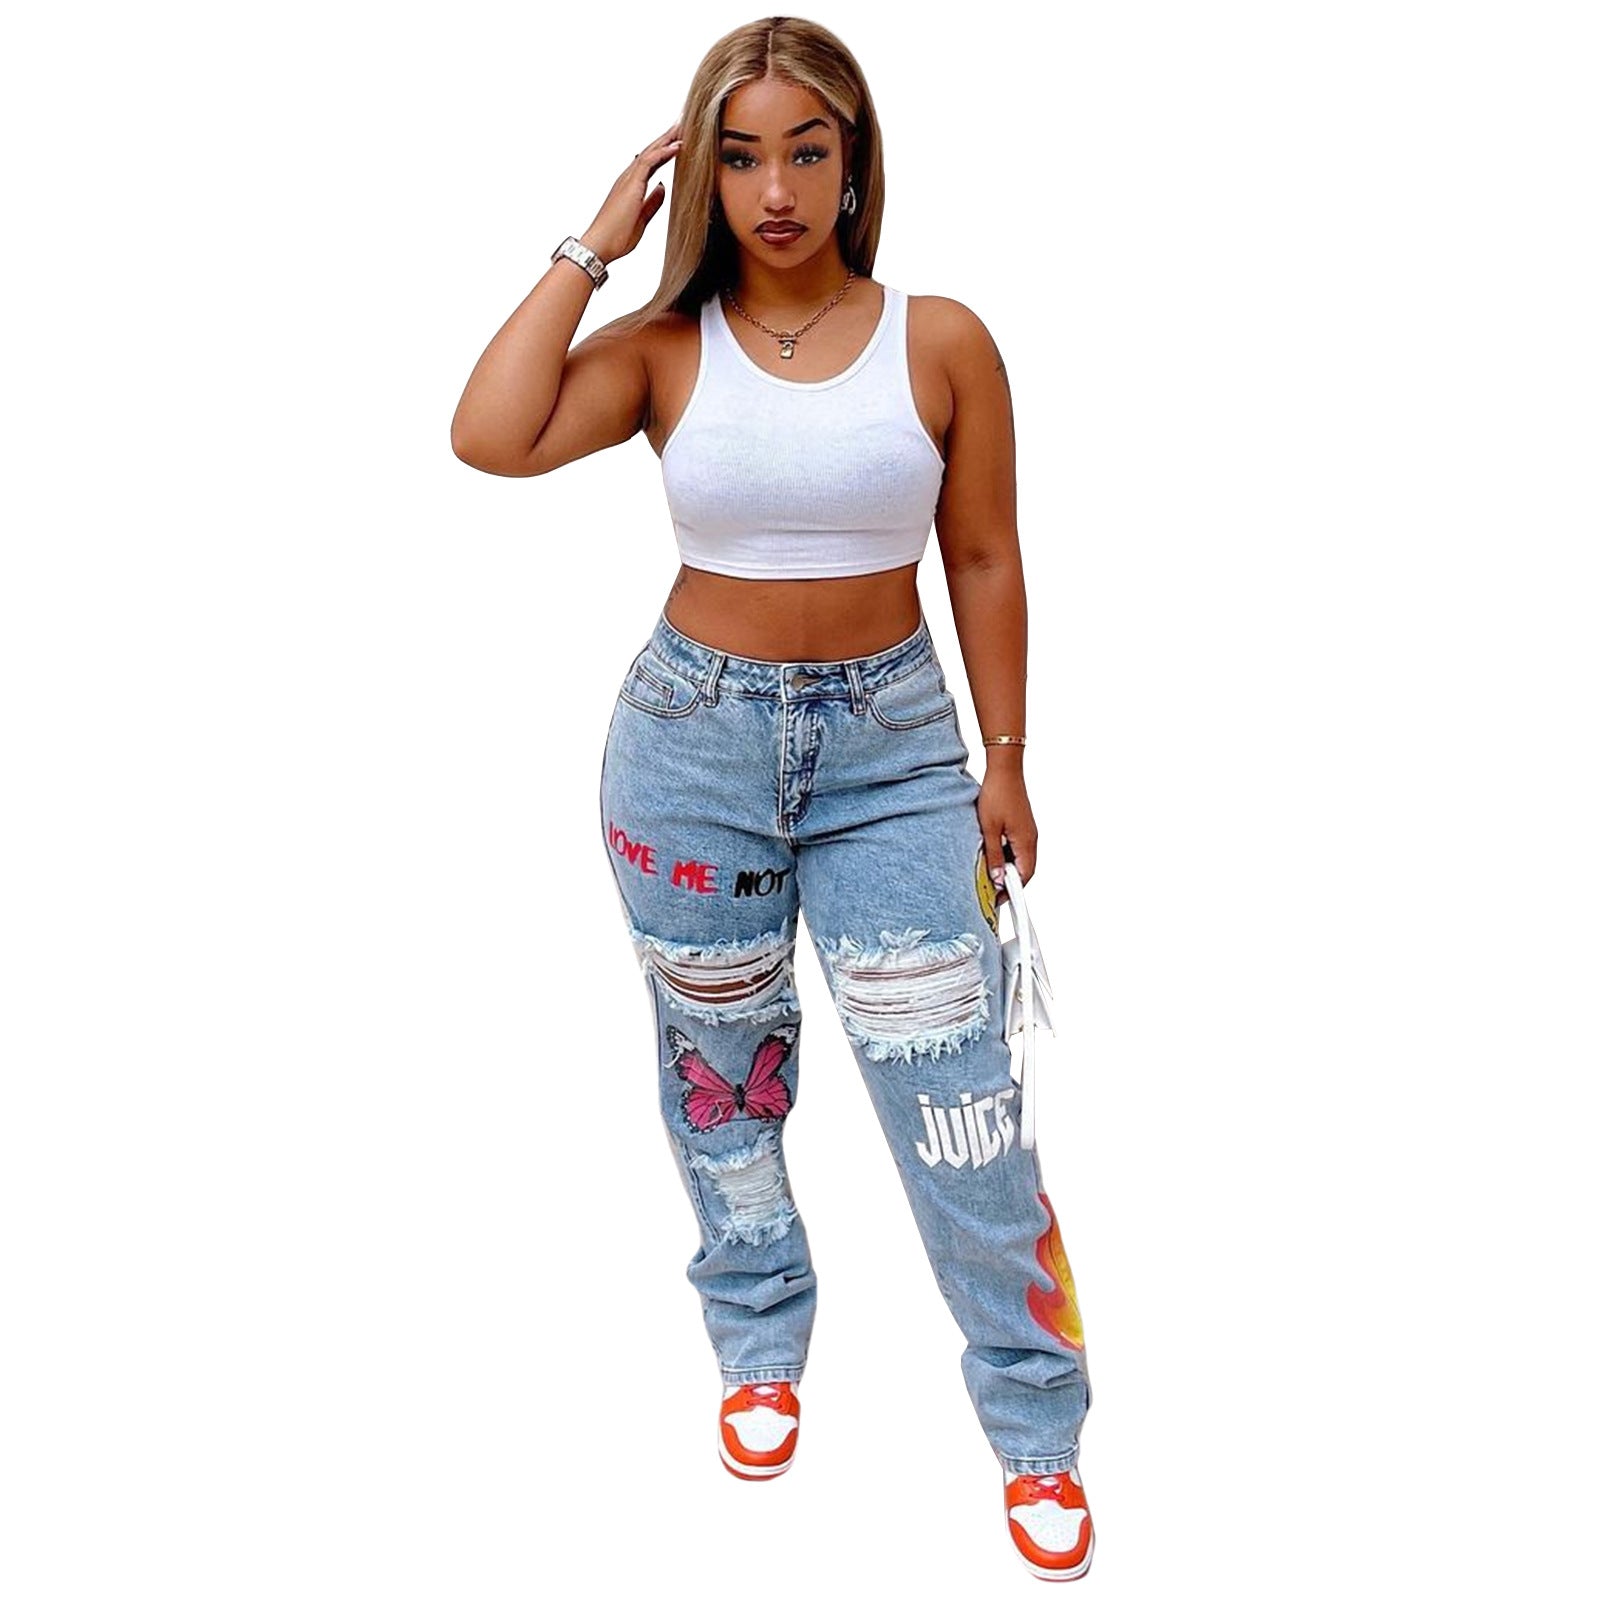 Girly Girl High Waist Ripped Jeans